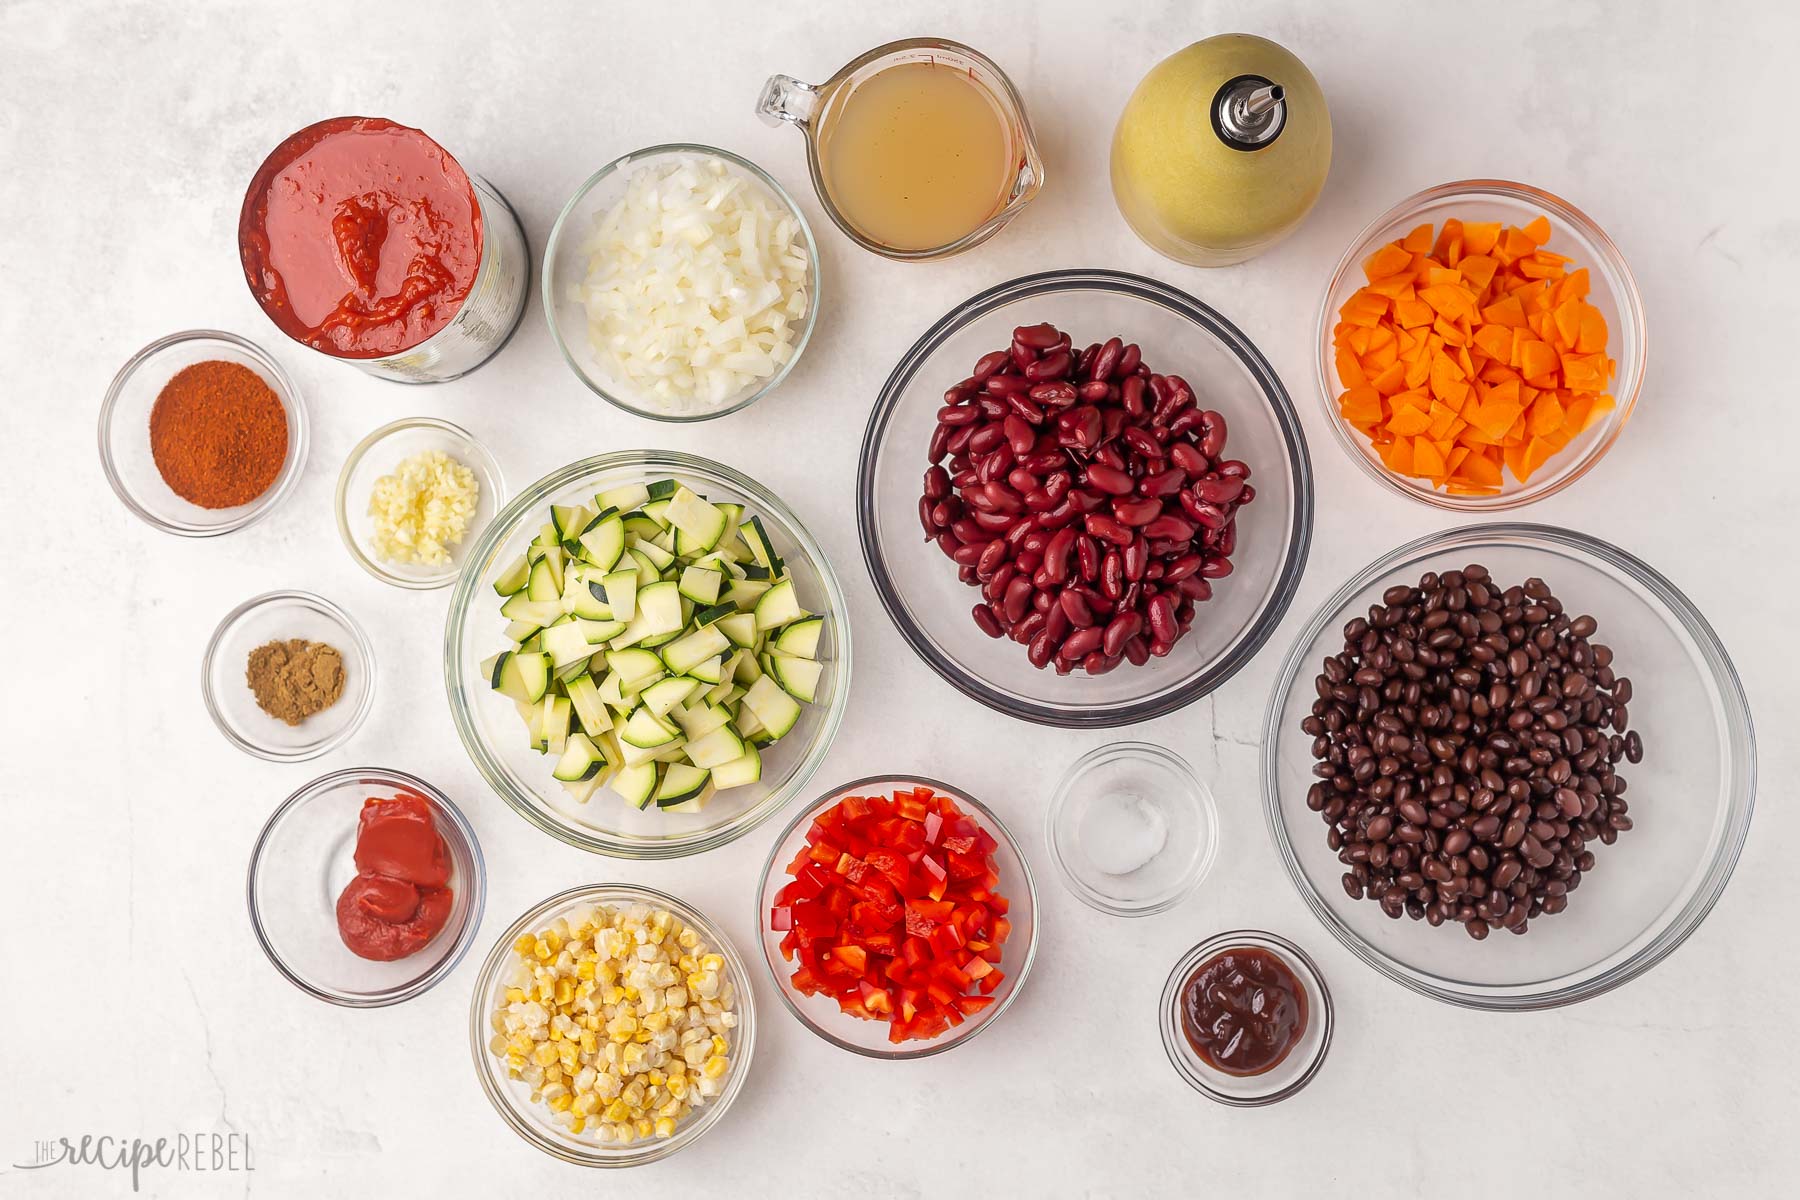 Top view of ingredients for vegetarian chilli in glass bowls.